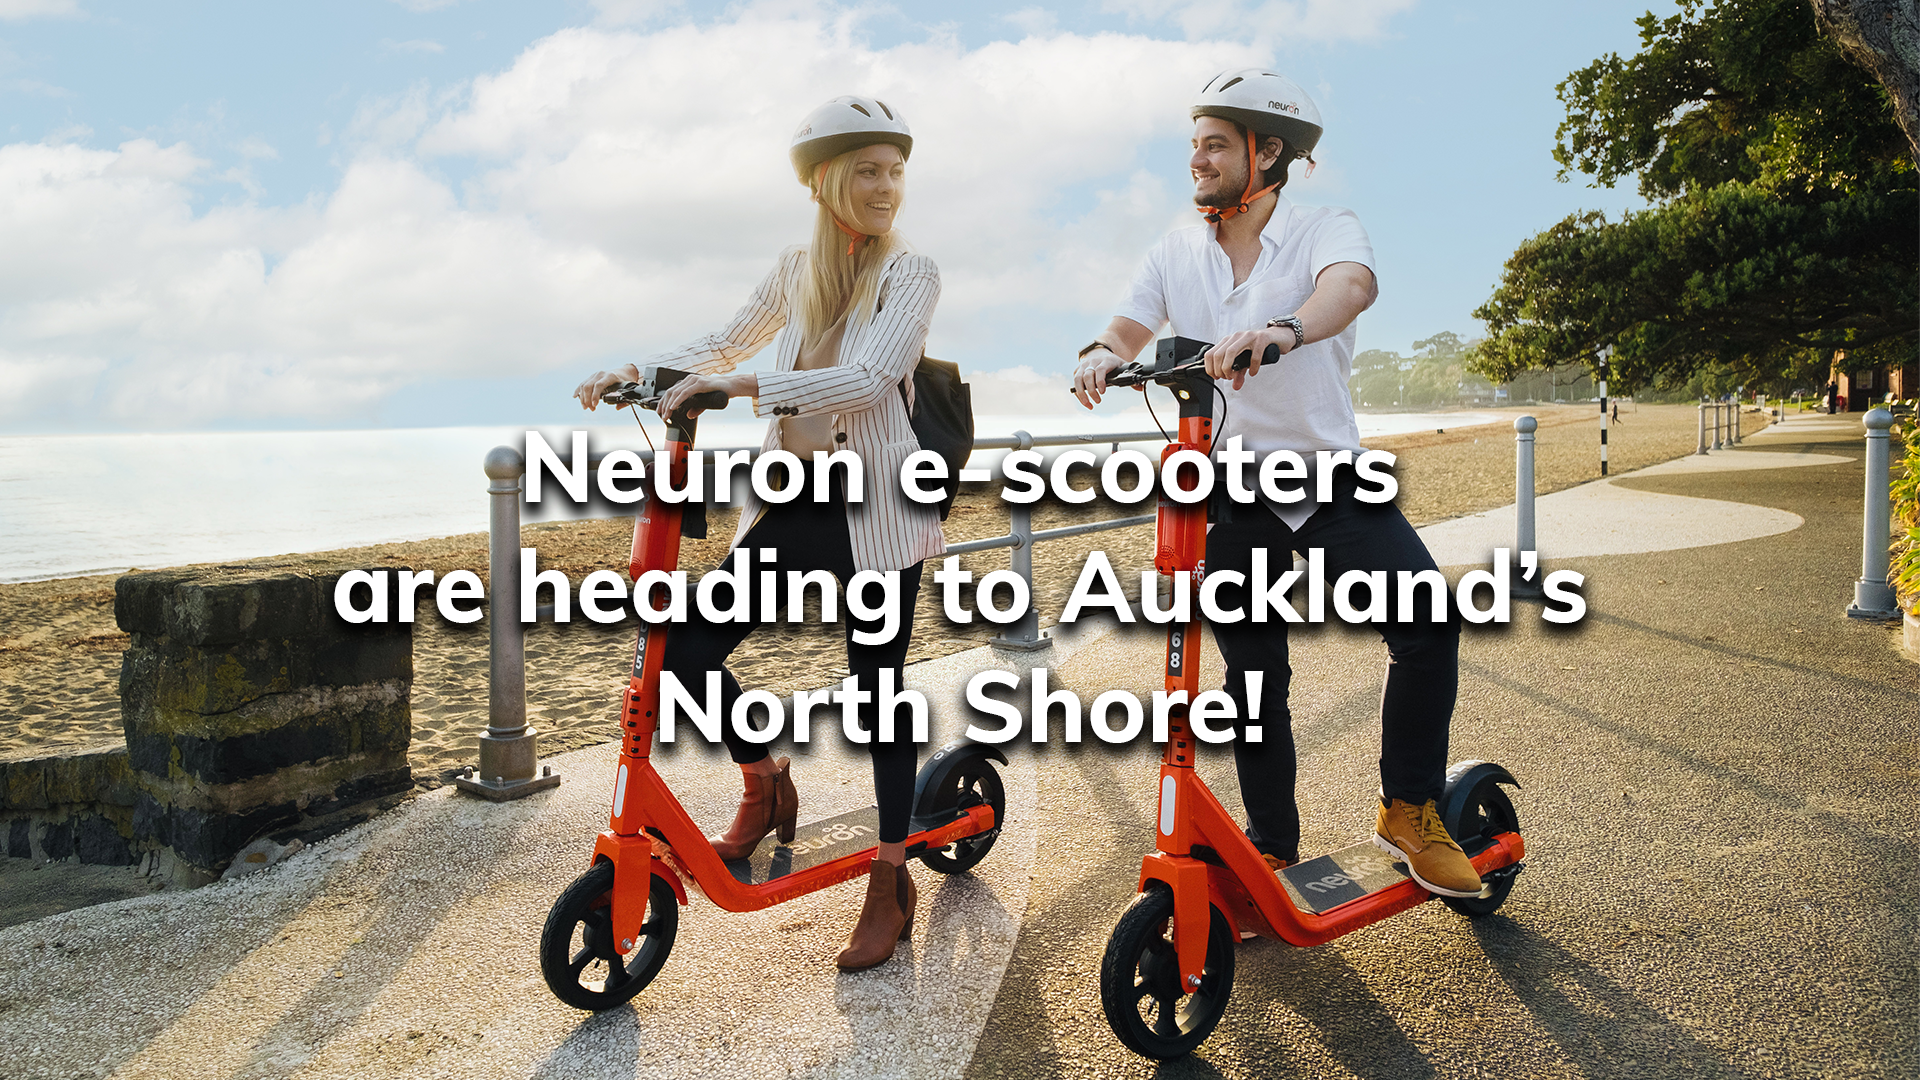 You are currently viewing Neuron e-scooters are heading to Auckland’s North Shore!